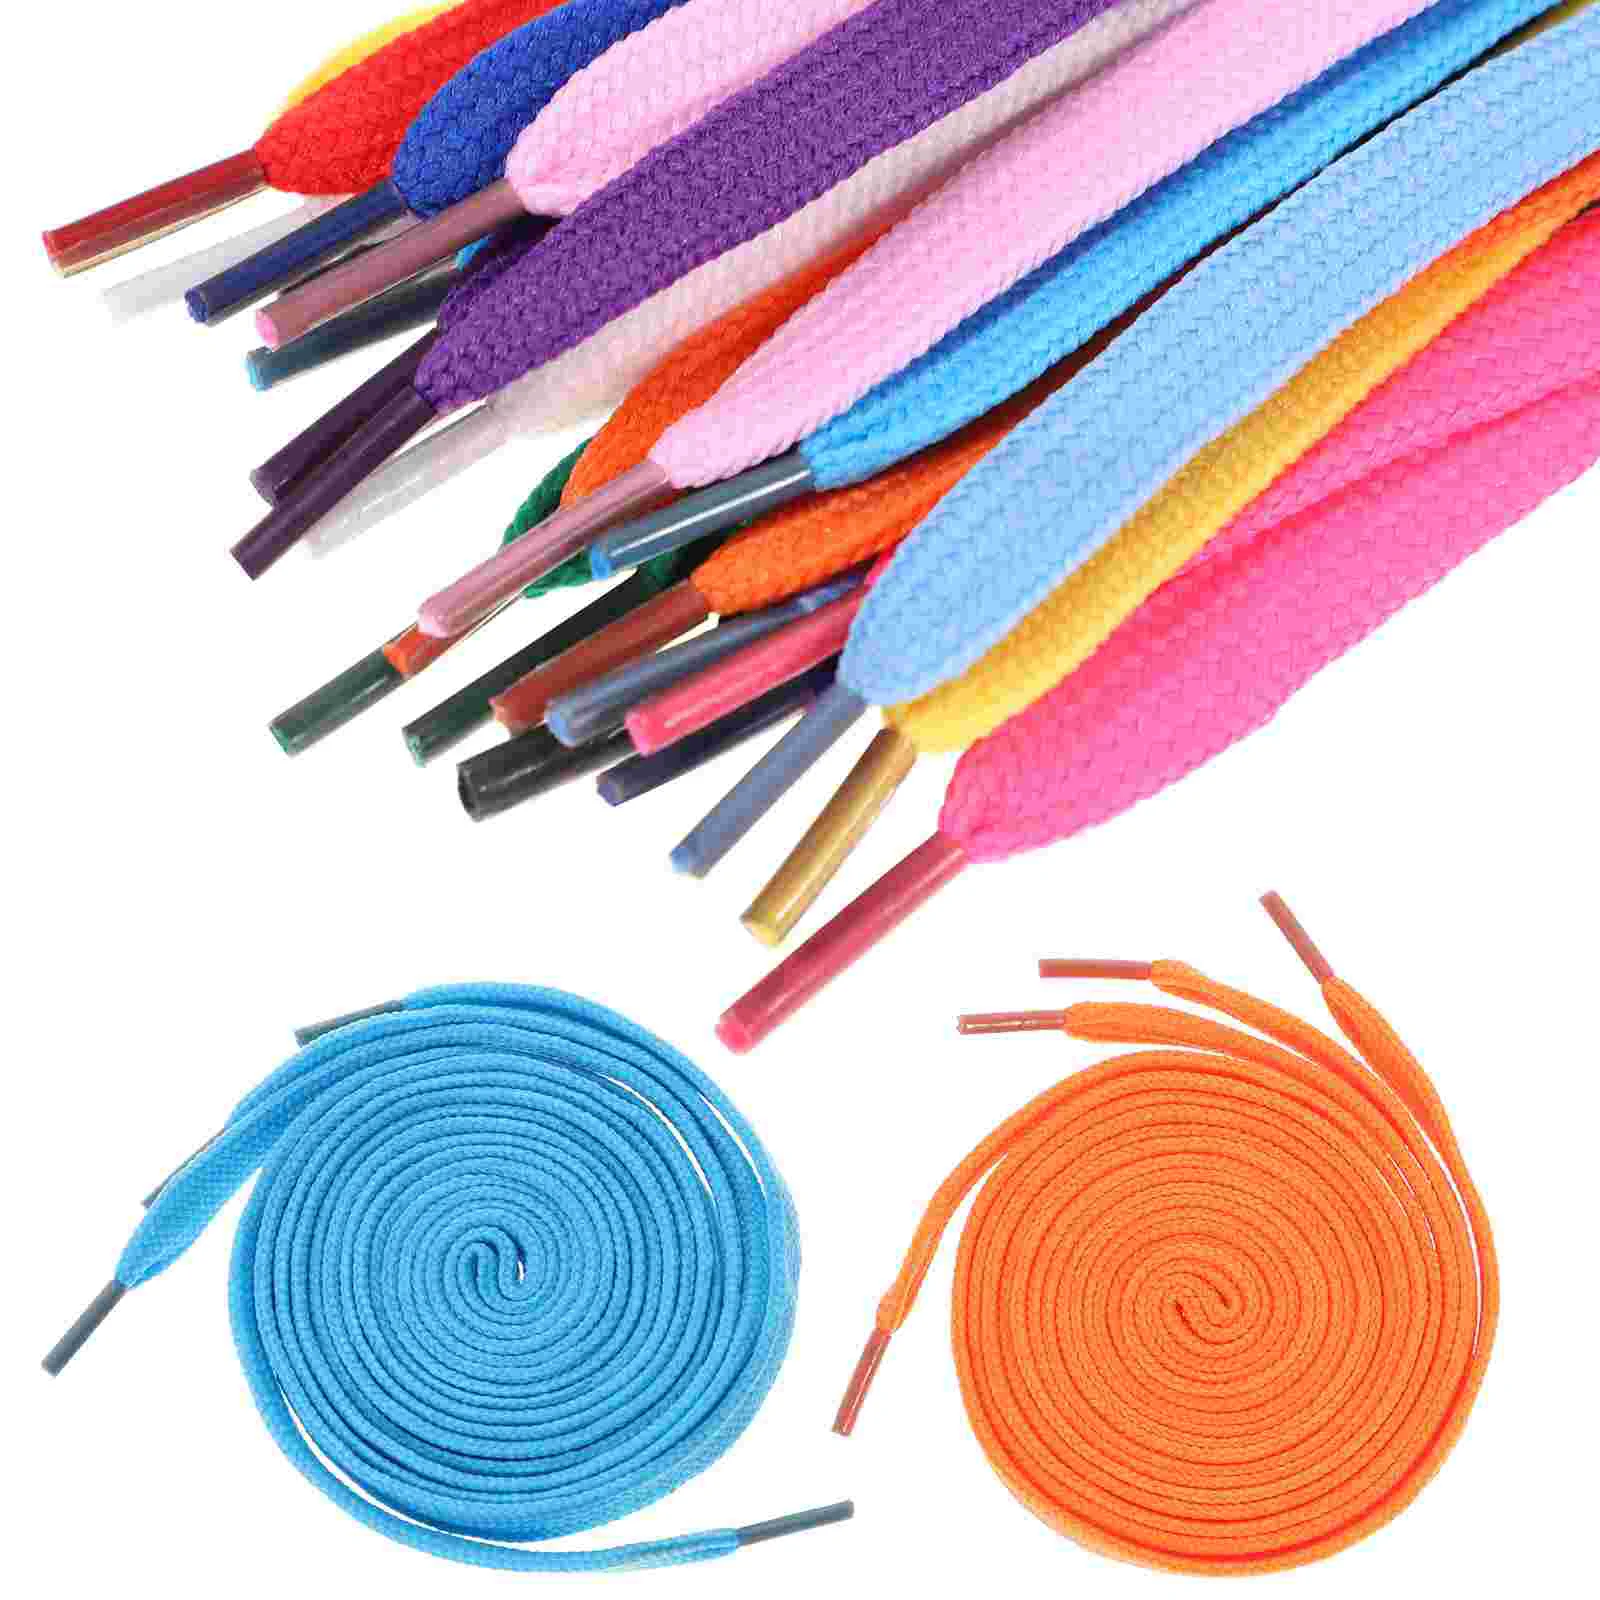 of Replacement Flat Shoelaces Shoe Laces Strings for Sports Shoes /Boots /Sneakers /Skates (Assorted Colors) skate wax laces ice roller skates polyester shoelaces flat colorful tie wide shoes skating